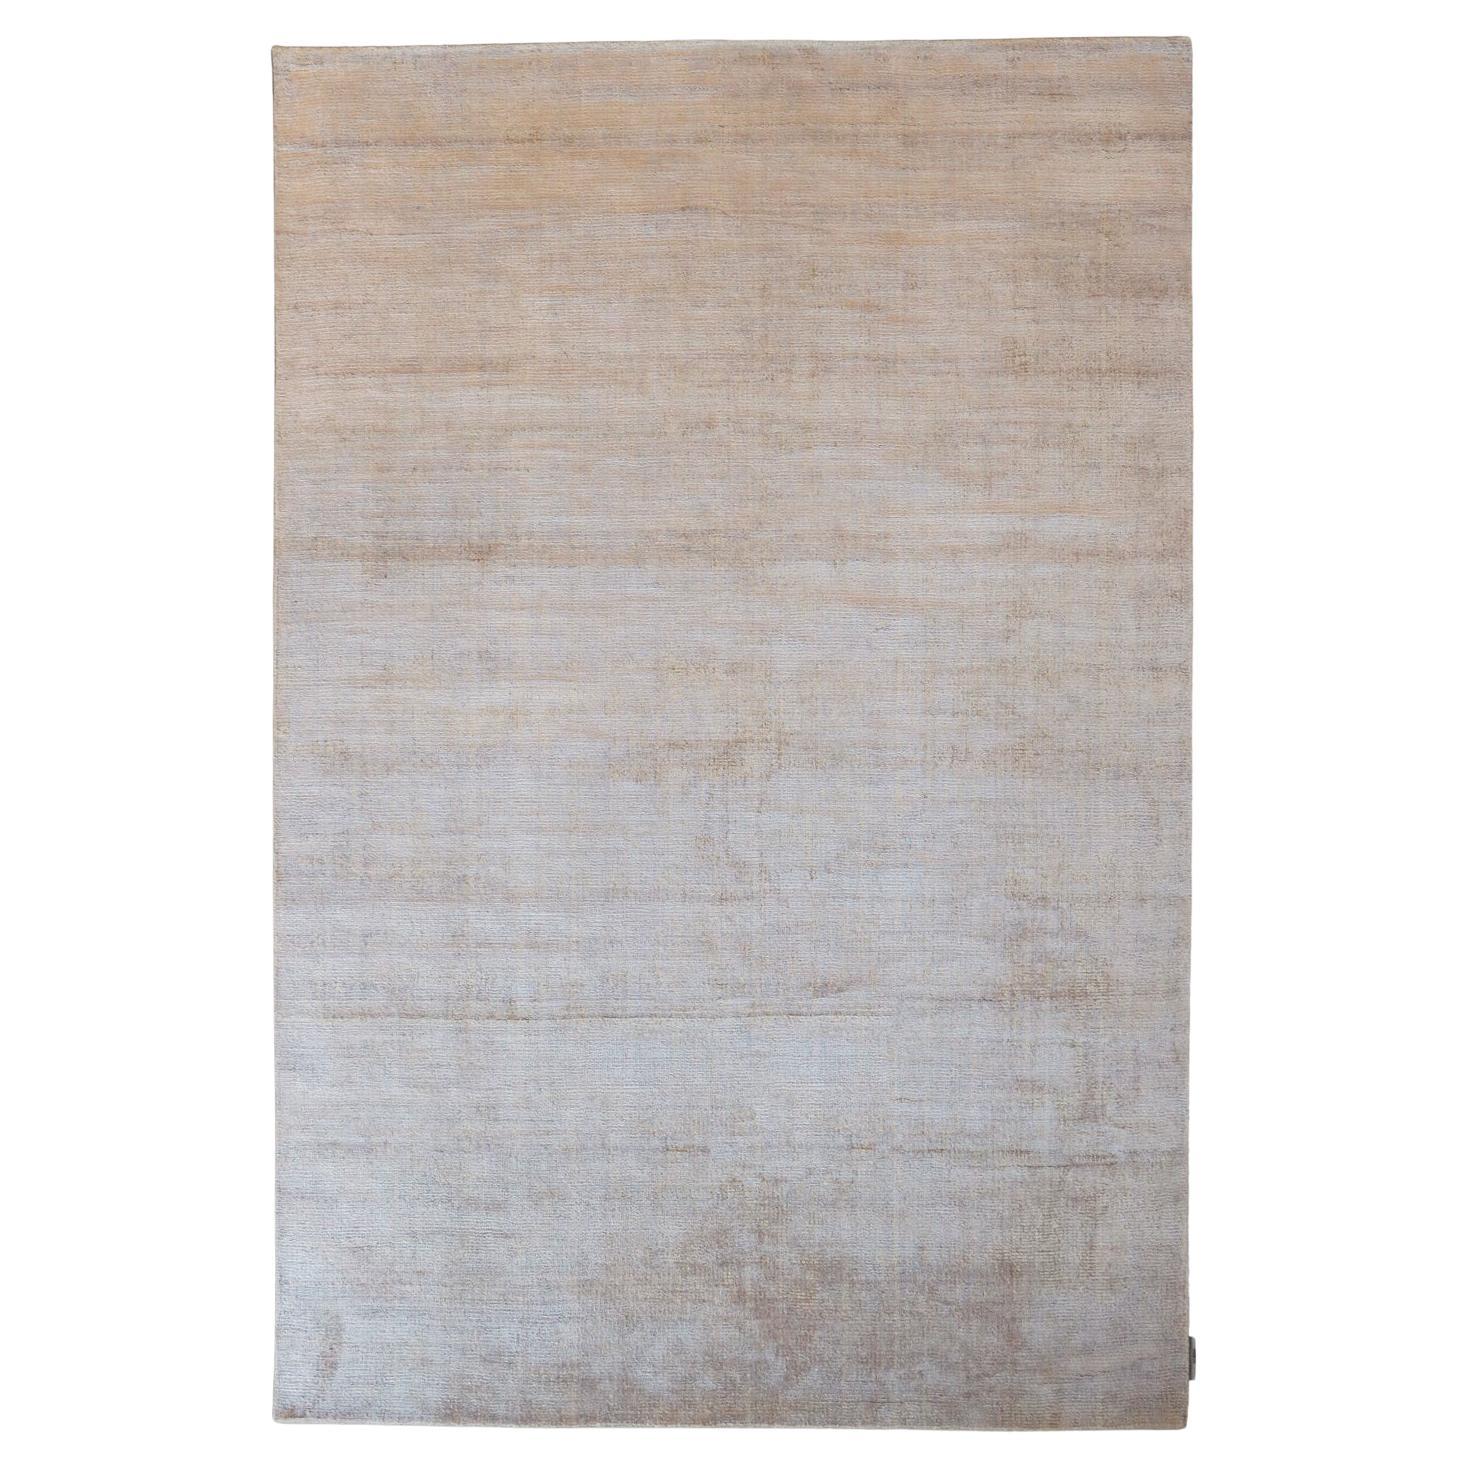 Contemporary Classic Luxury Soothing Hues Rug by Deanna Comellini 200x300 cm For Sale